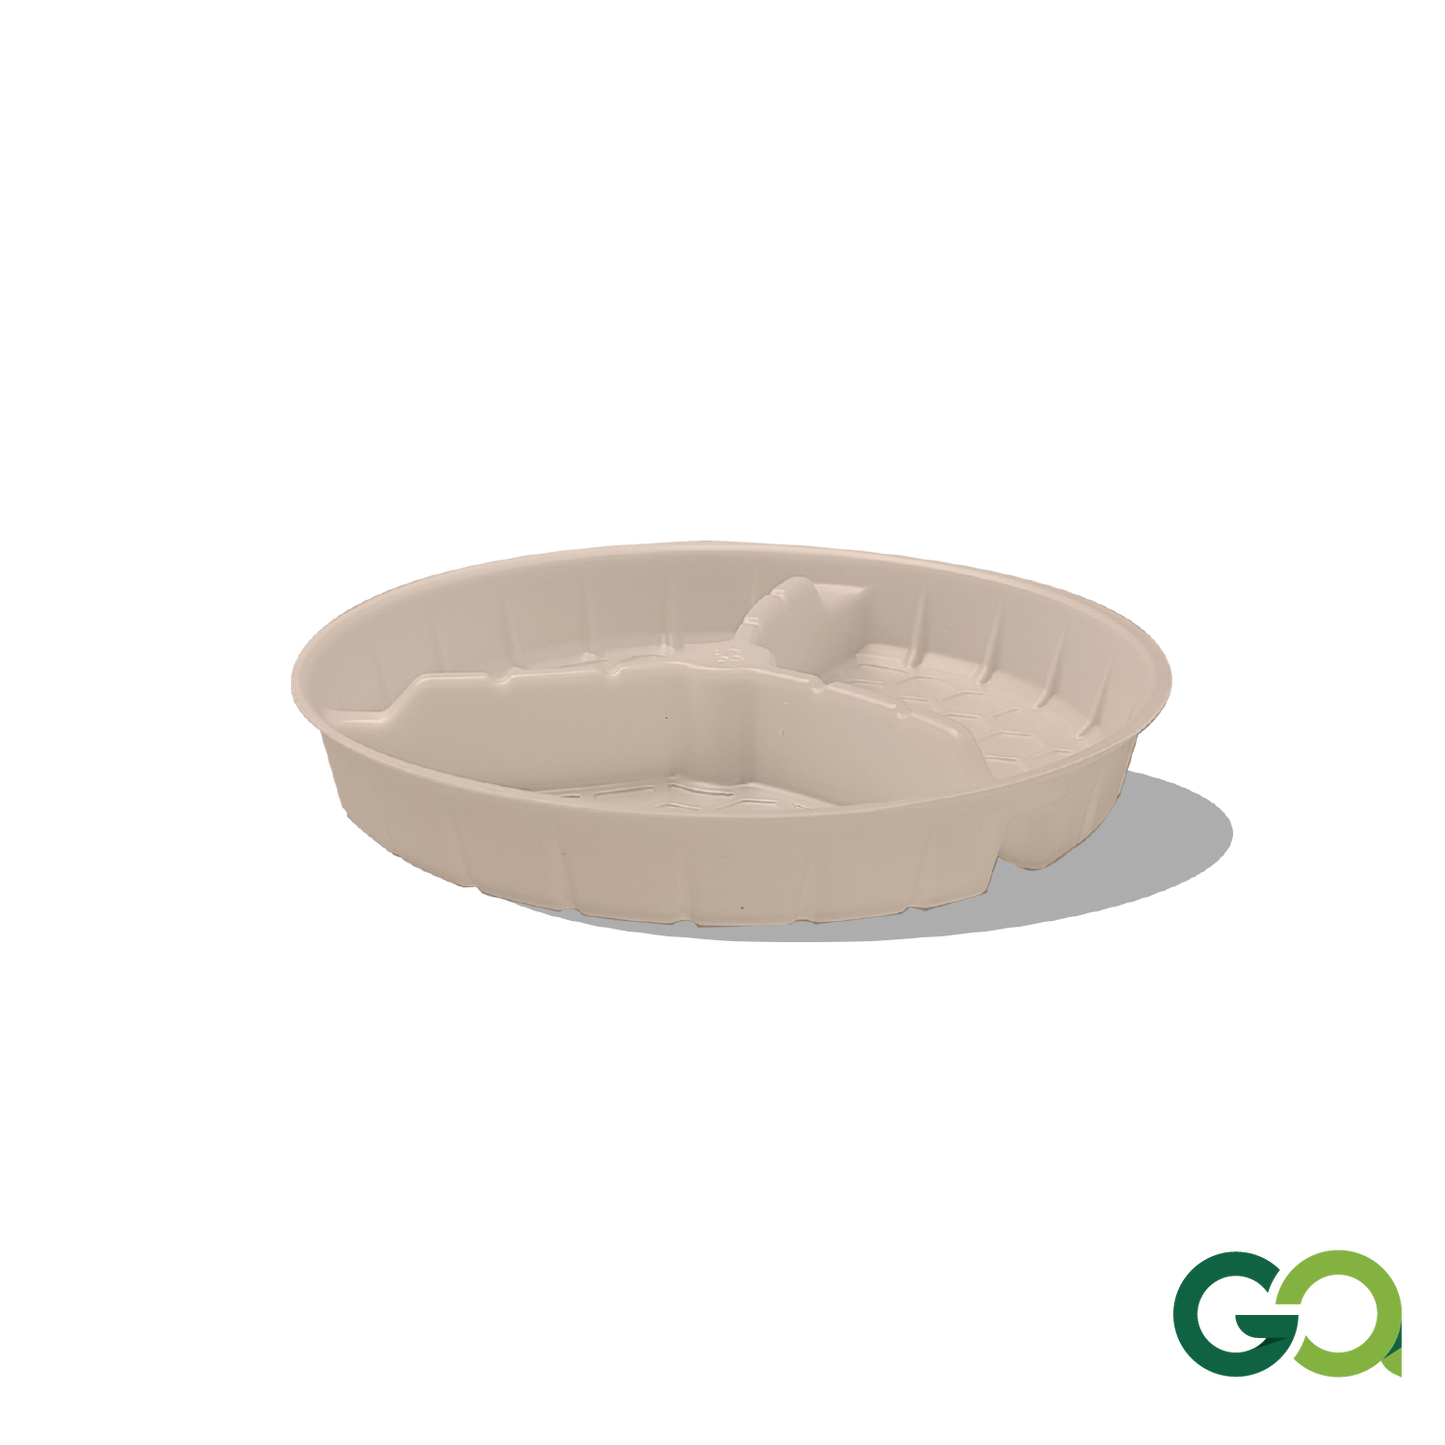 185mm INSERT 3 COMPARTMENT TRAY FOR 1100/1300/1500ml WIDE BOWL (1 carton : 300 pieces)